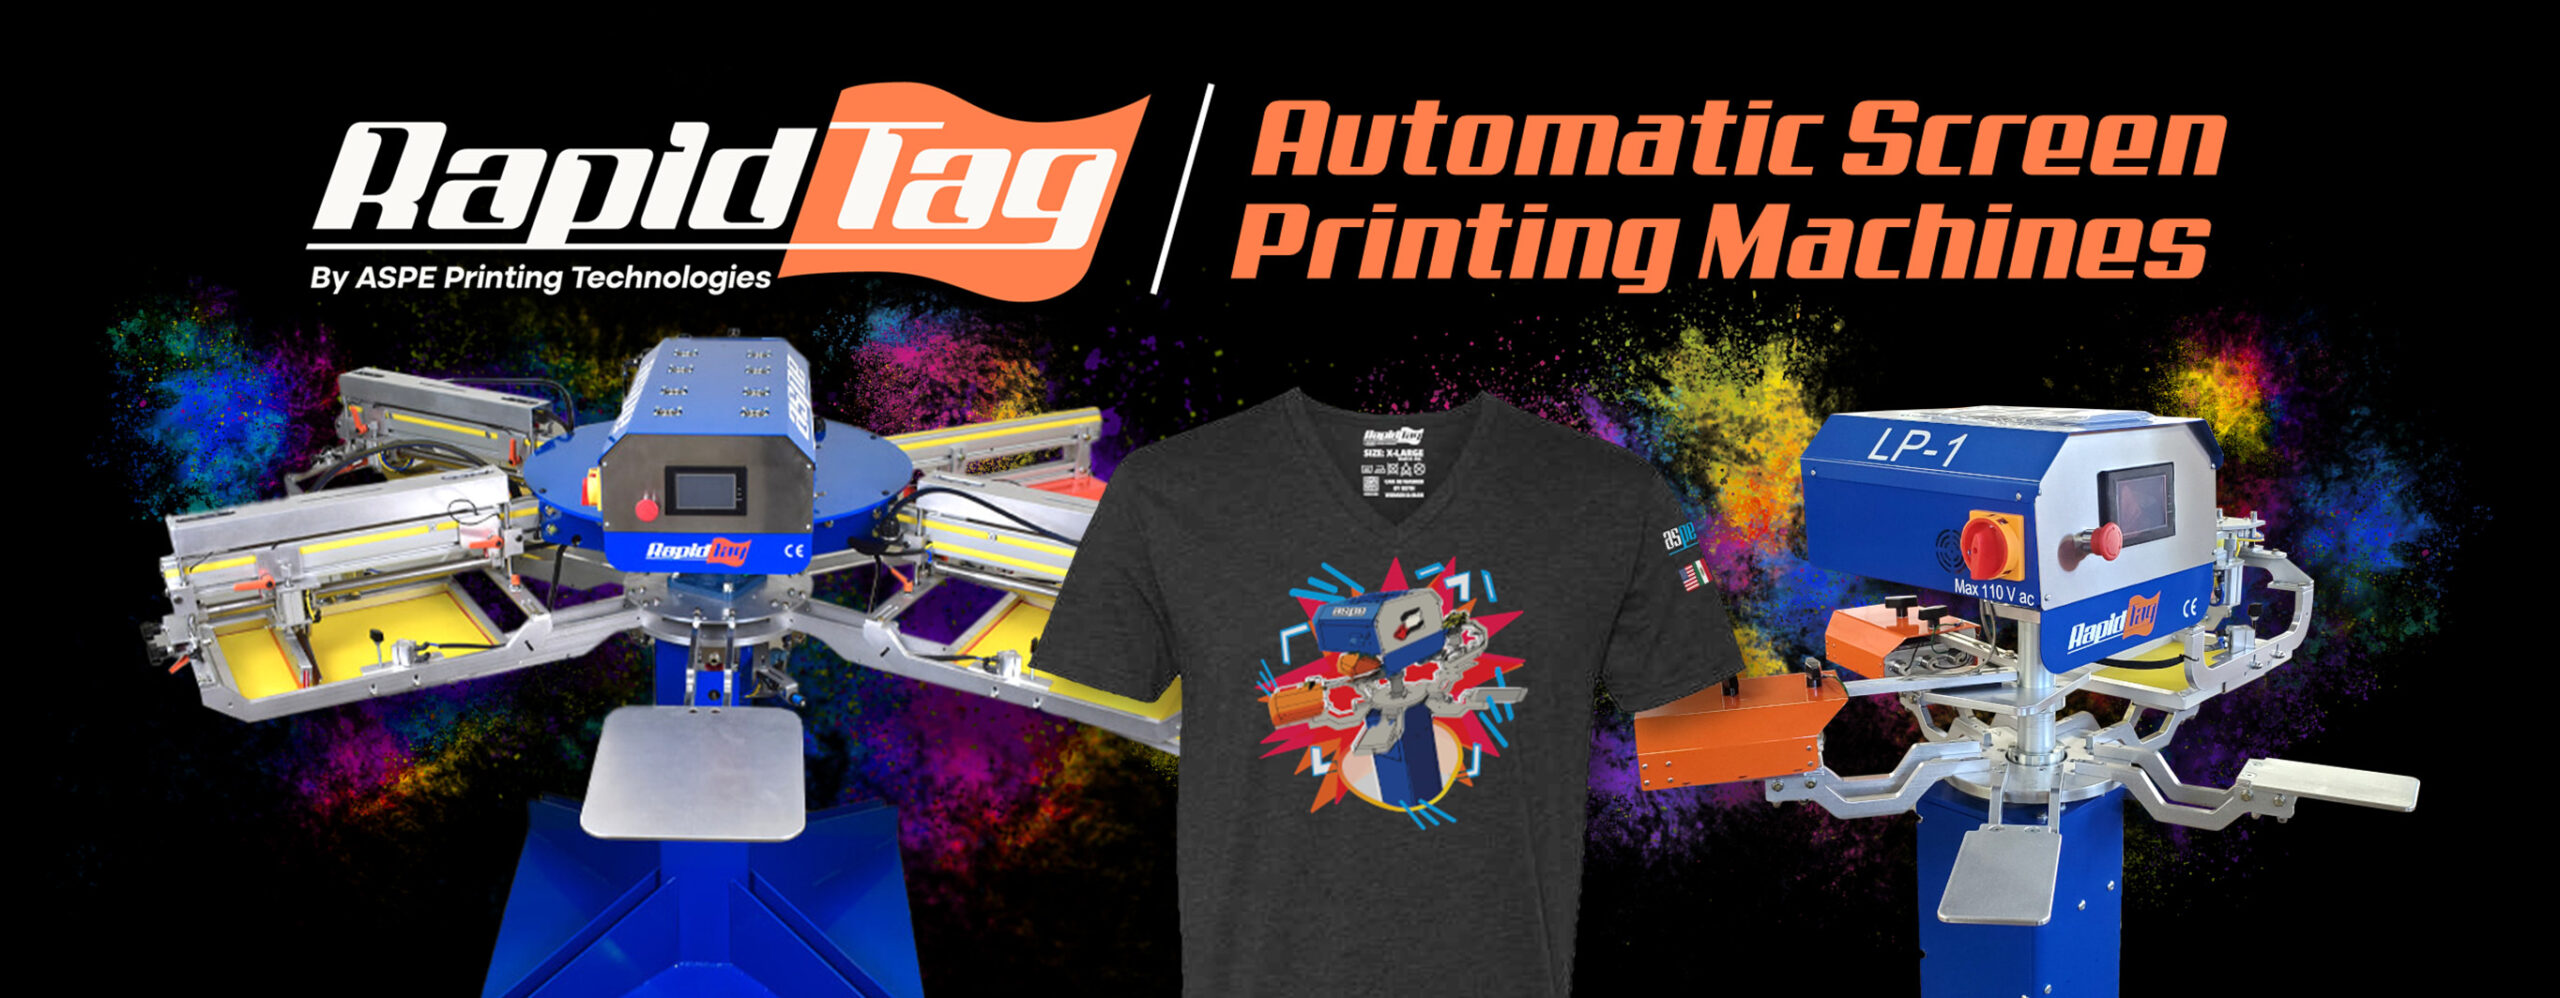 RapidTag automatic screen printing machines